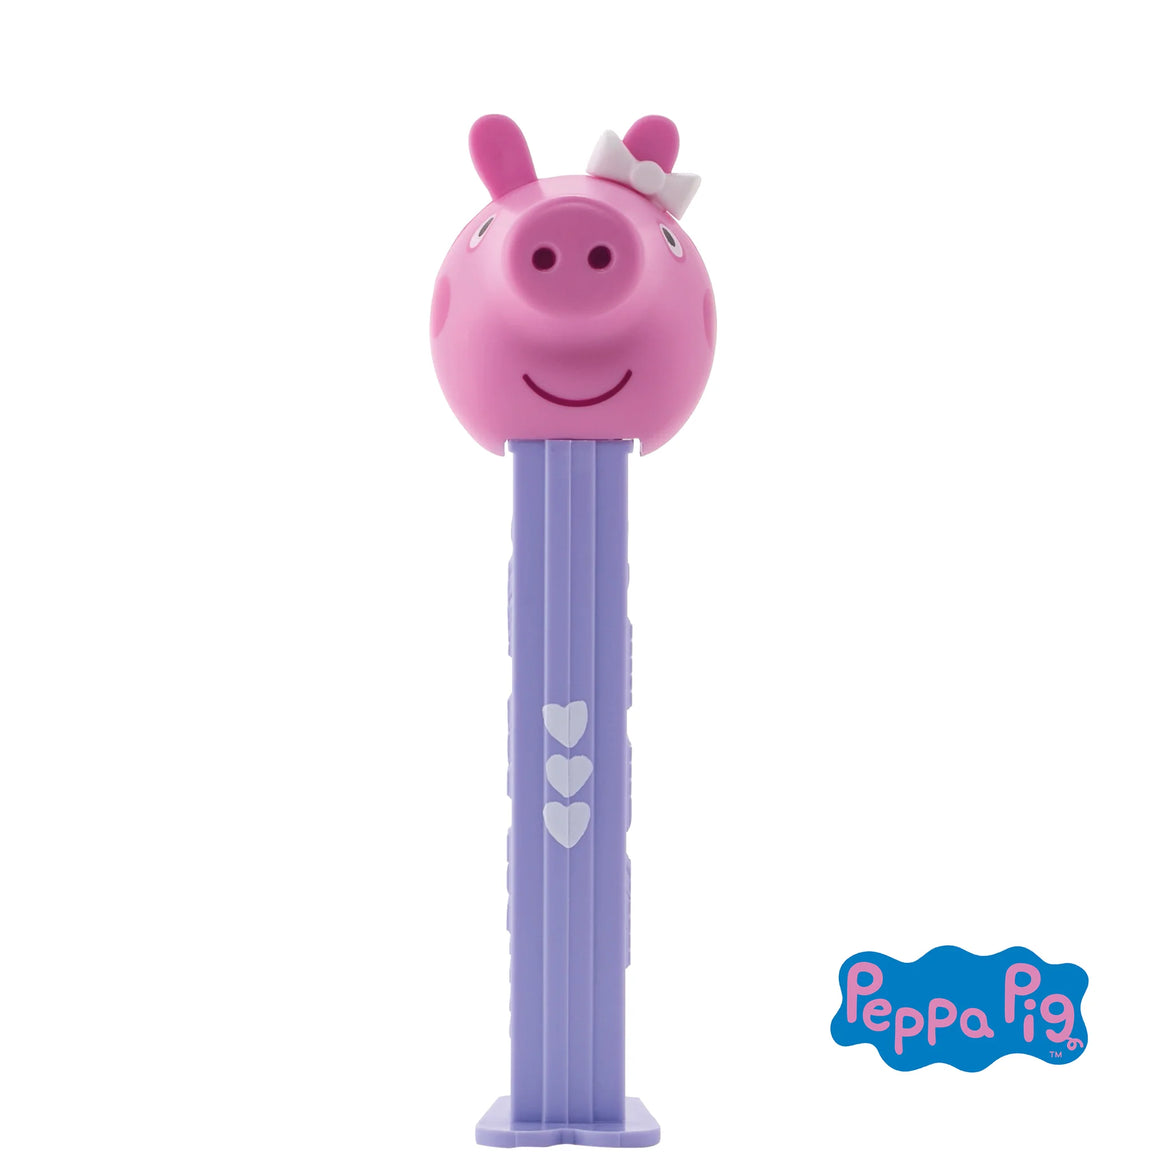 PEZ Peppa Pig Collection Candy Dispenser - 1-Piece Blister Pack